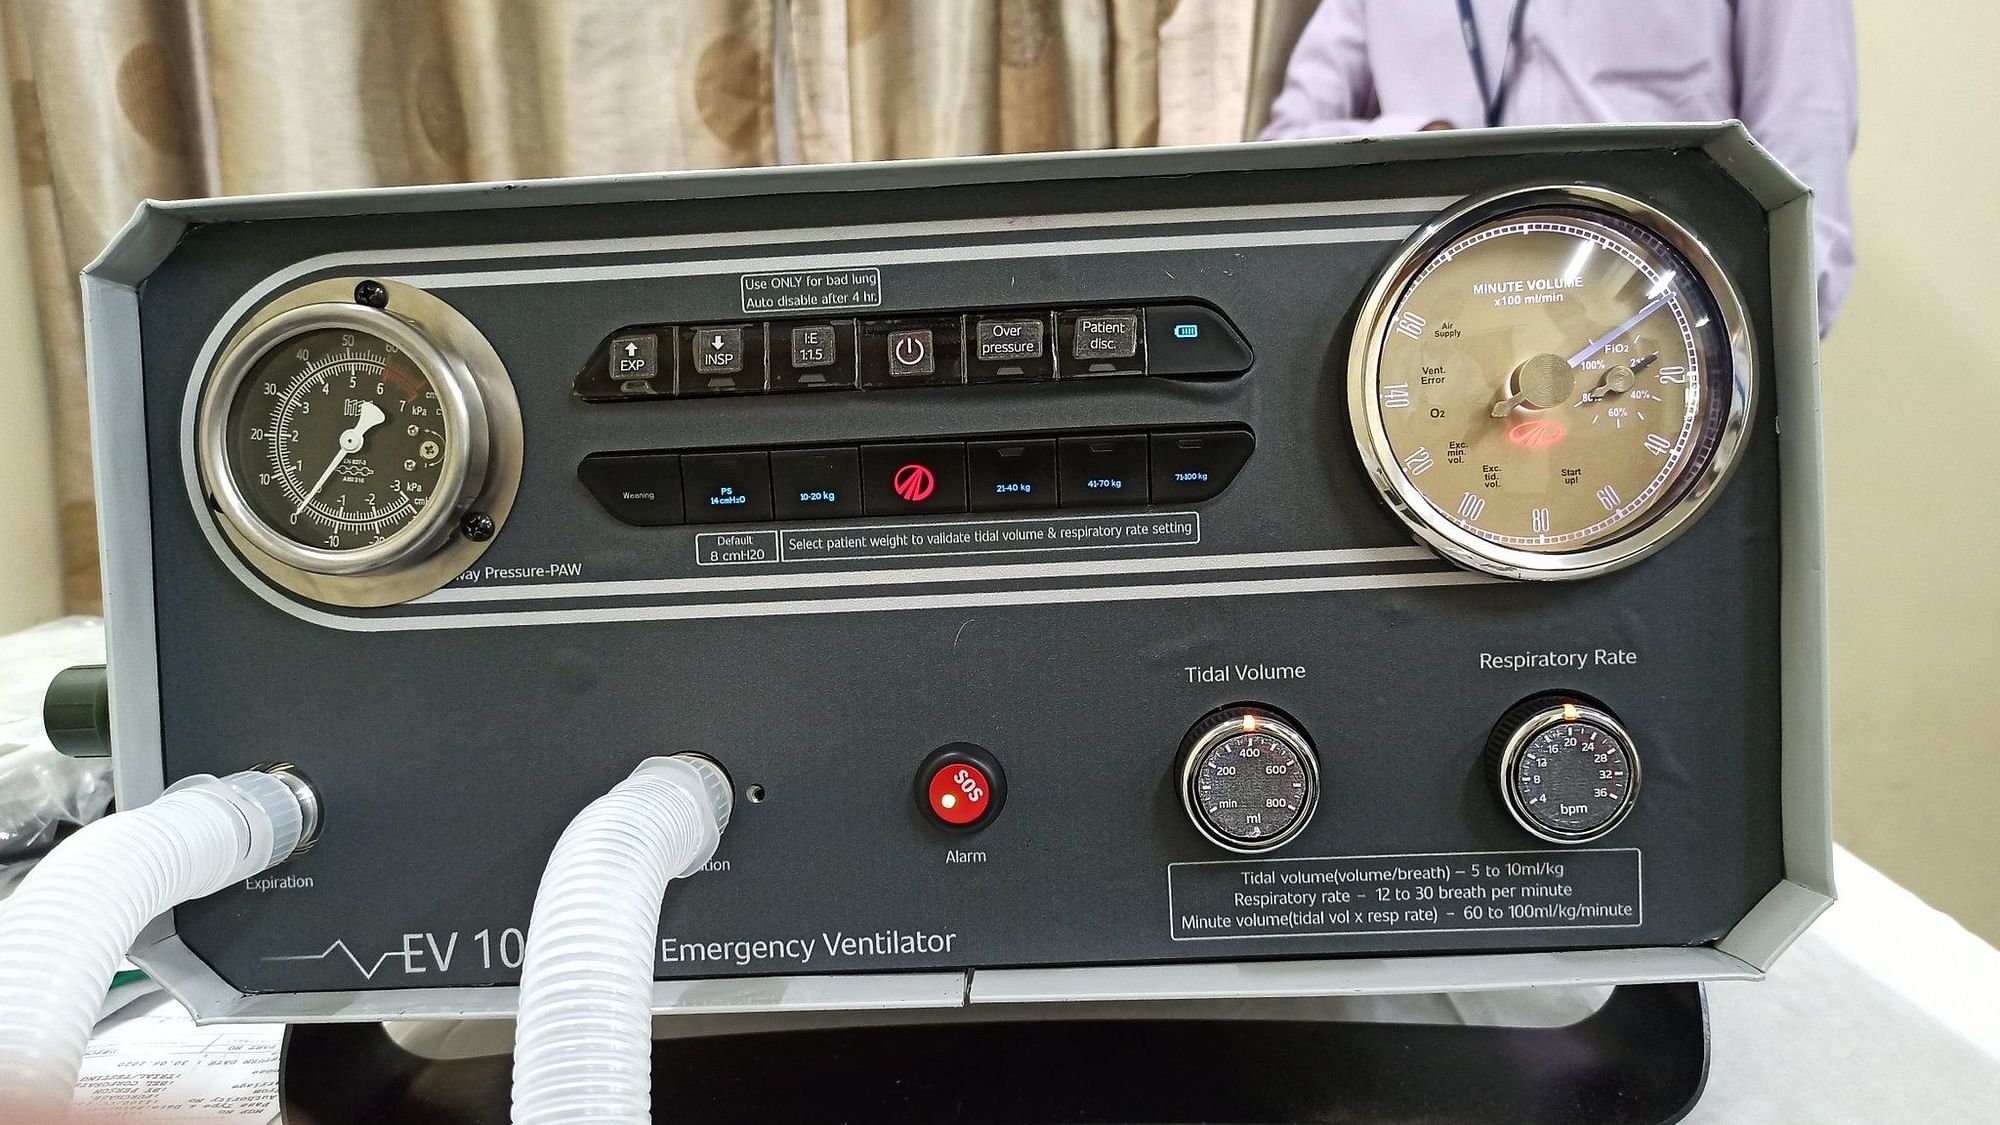 Export of ventilators was banned by the government in March 2020.